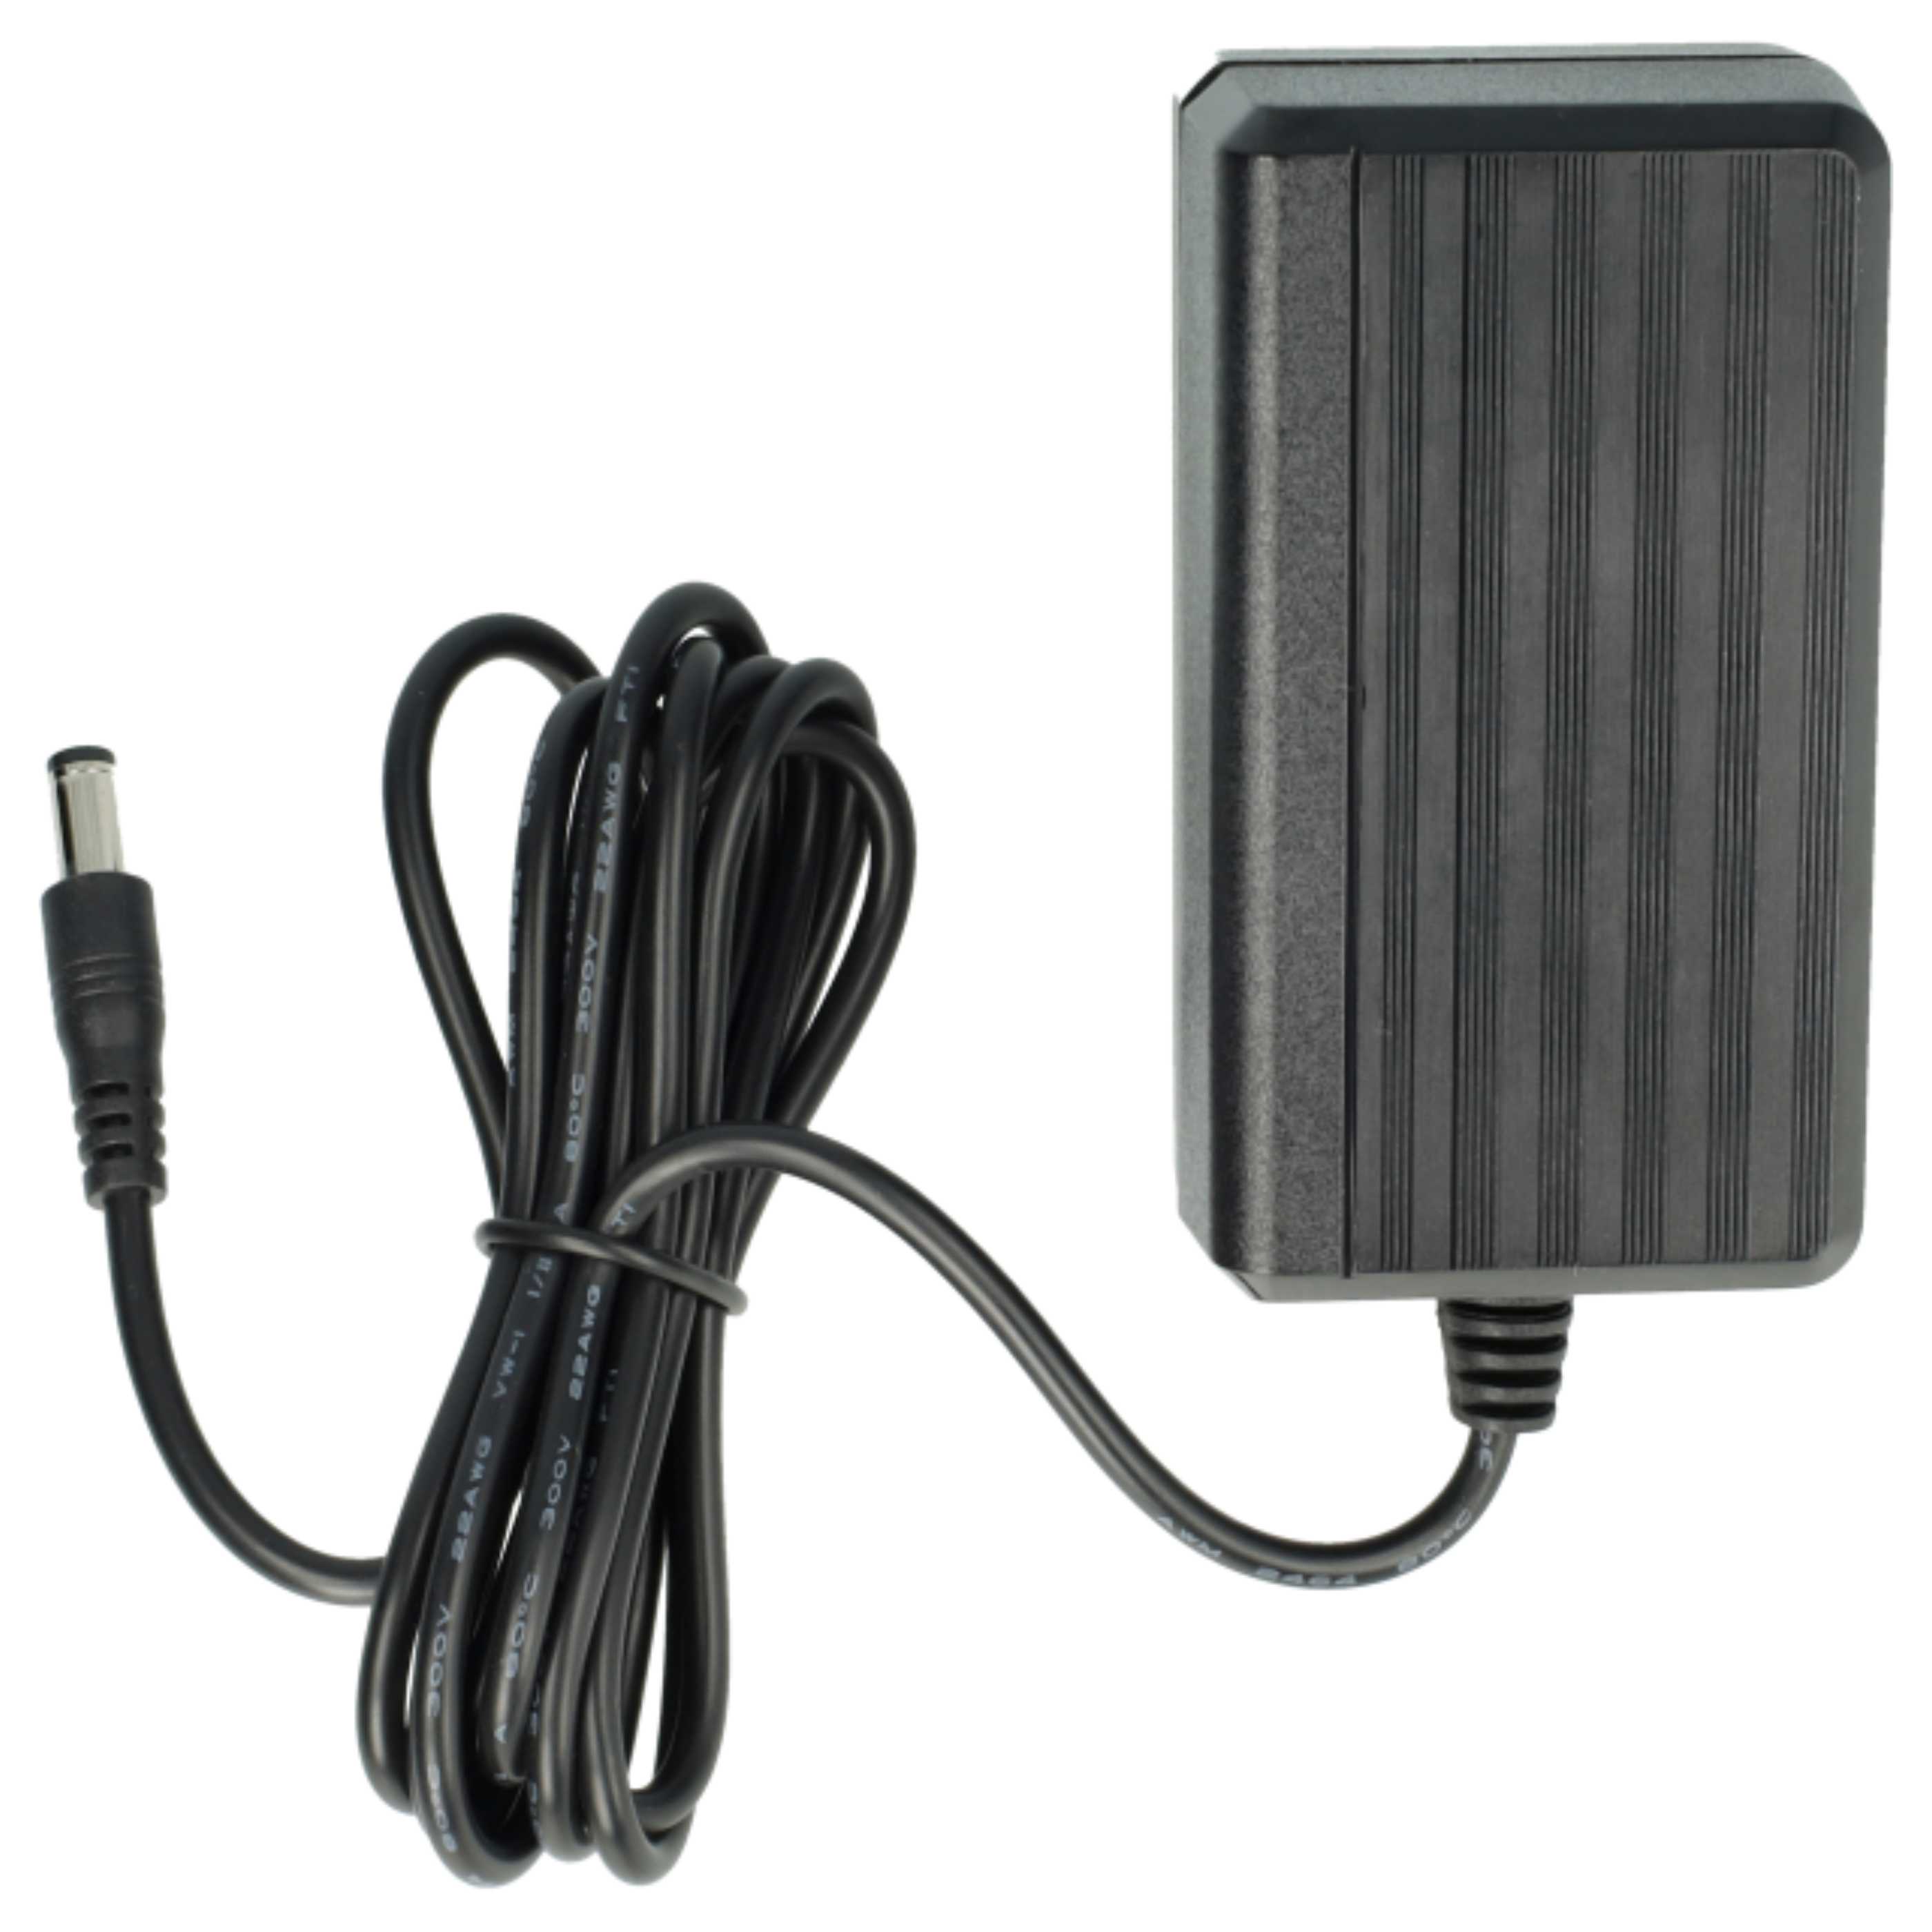 Mains Power Adapter replaces LG ZH-65-202 for LGNotebook, 40 W